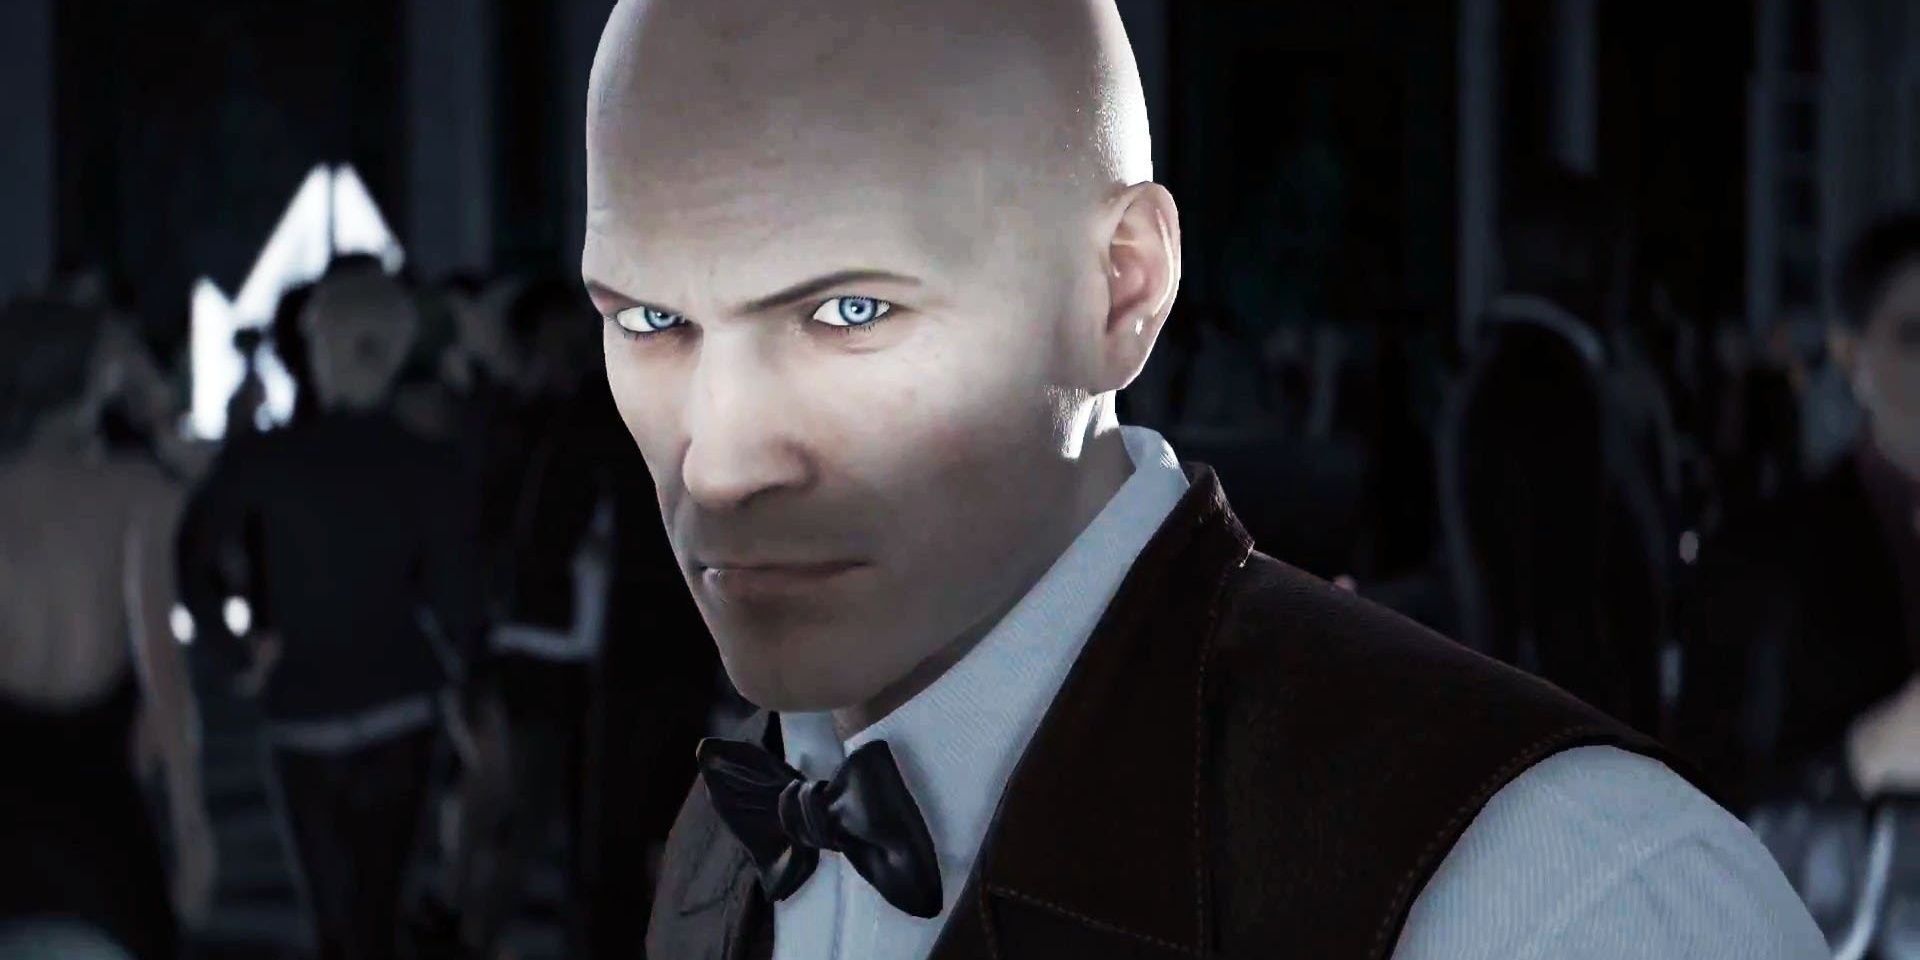 Agent 47 dressed as a waiter in Hitman (2016)